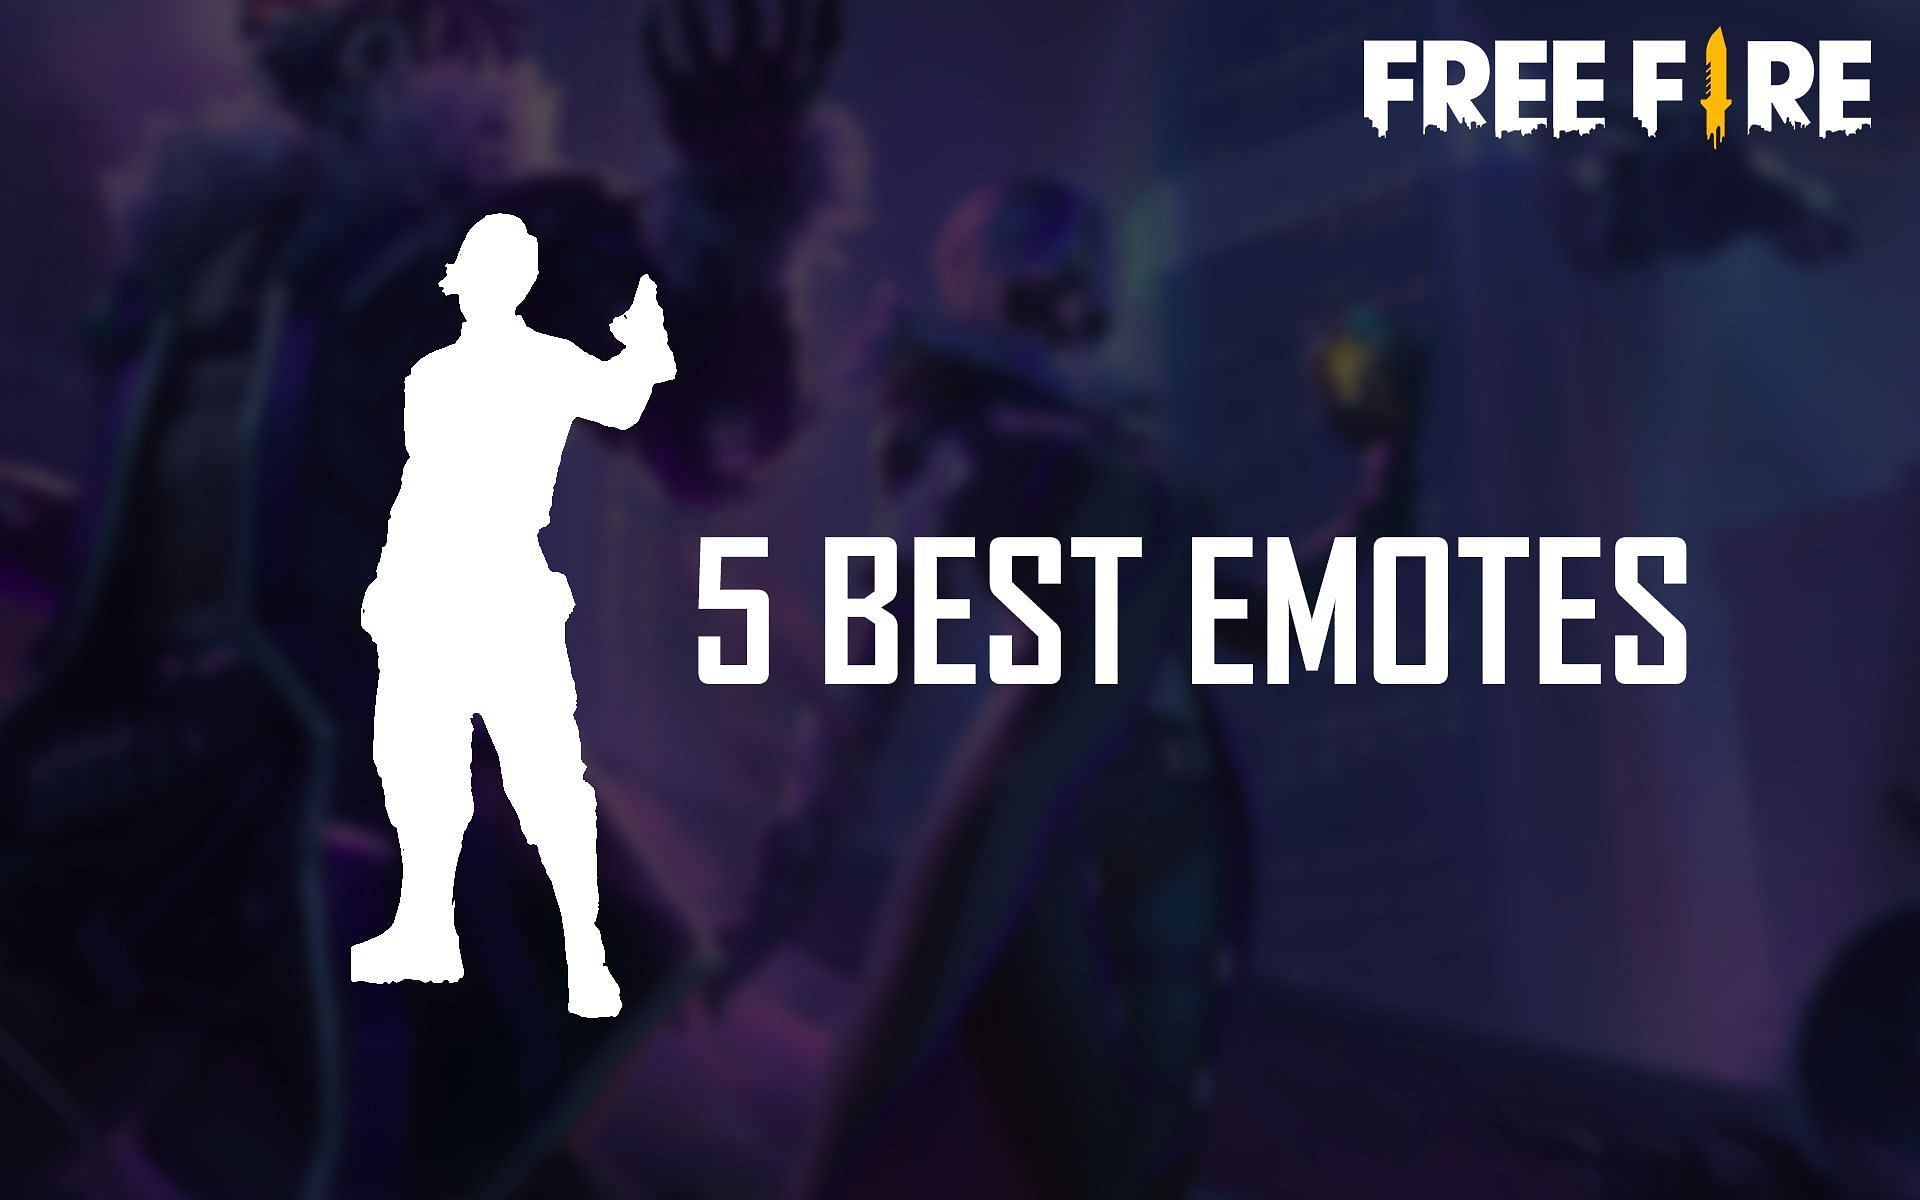 Several emotes were given to the players for free (Image via Free Fire)